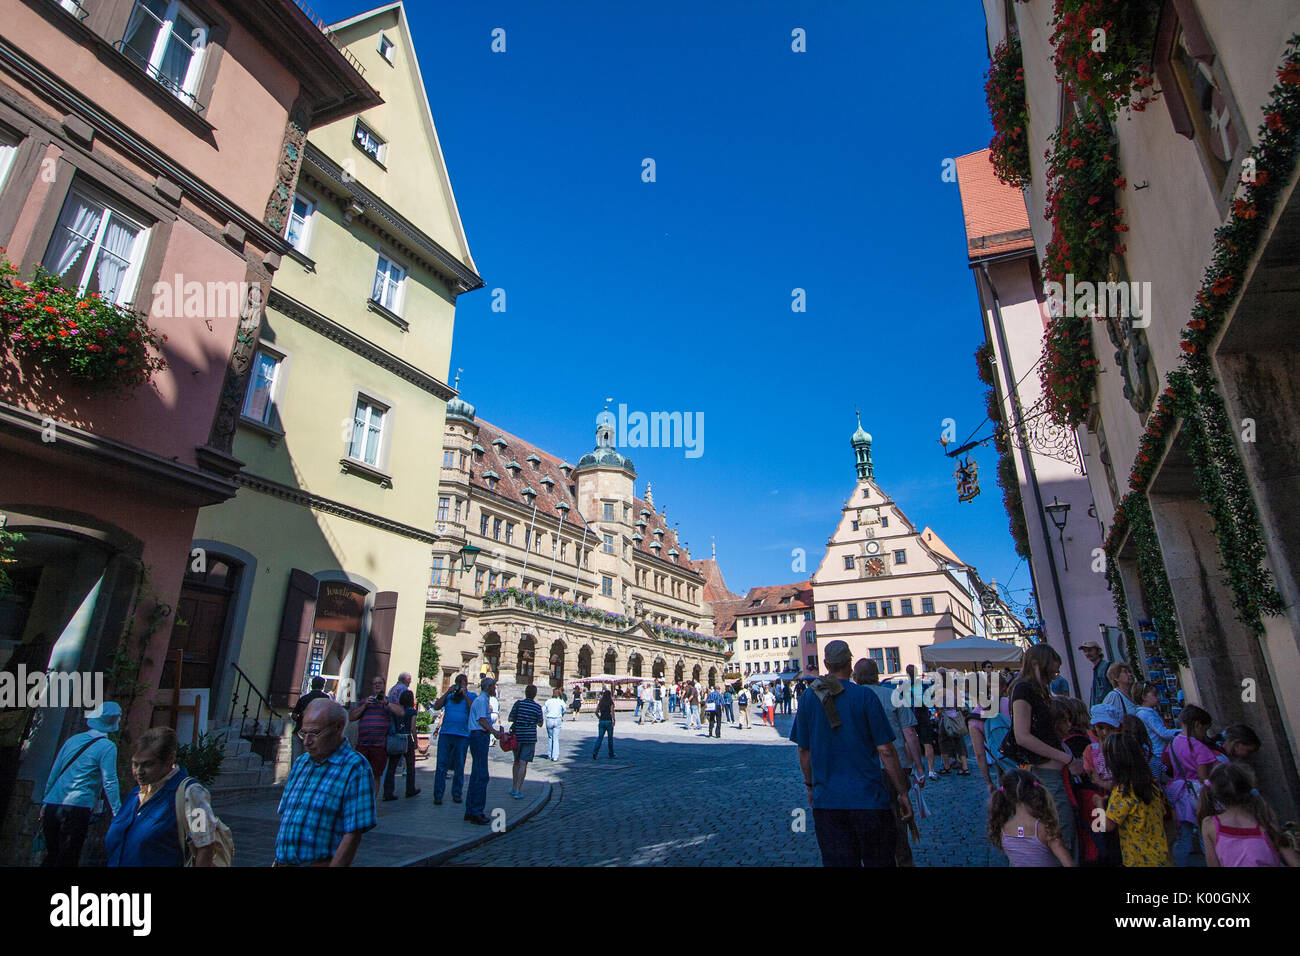 The old city centre of Regensburg Bavaria Southern Germany Europe Stock Photo